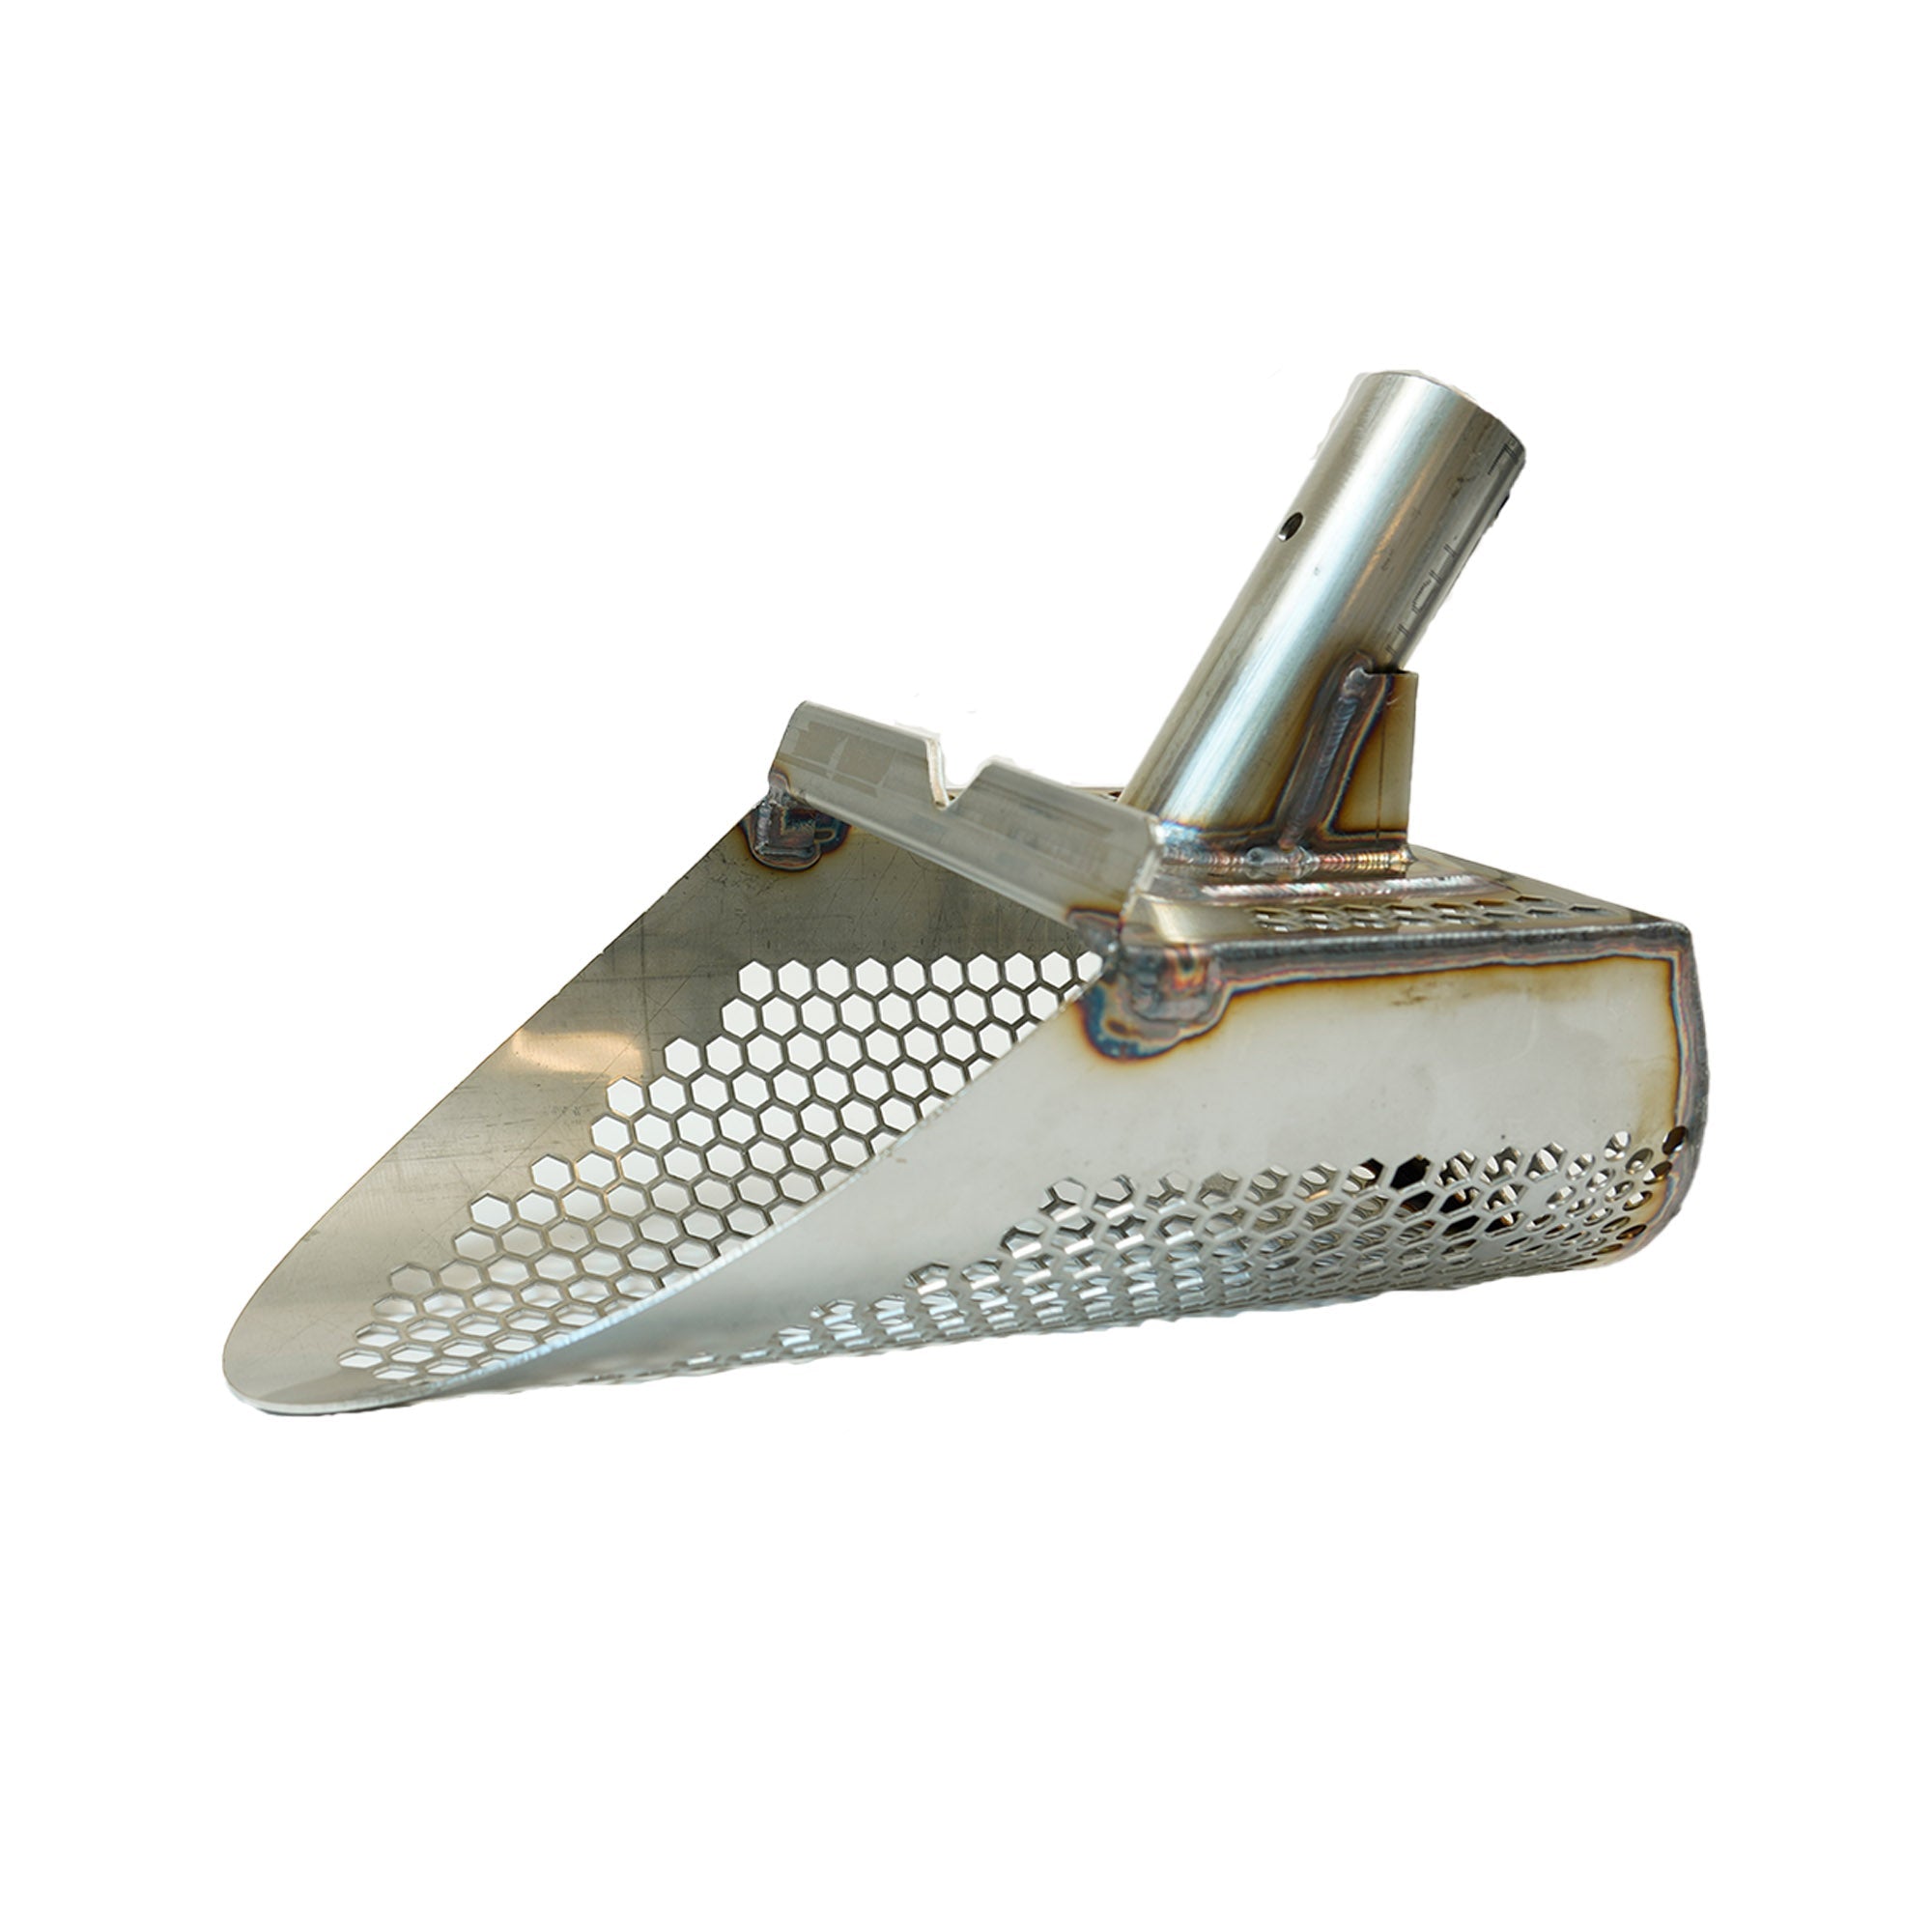 T-Rex 6.5" Wide Wet Stainless Steel Sand Scoop with 3/8” Holes